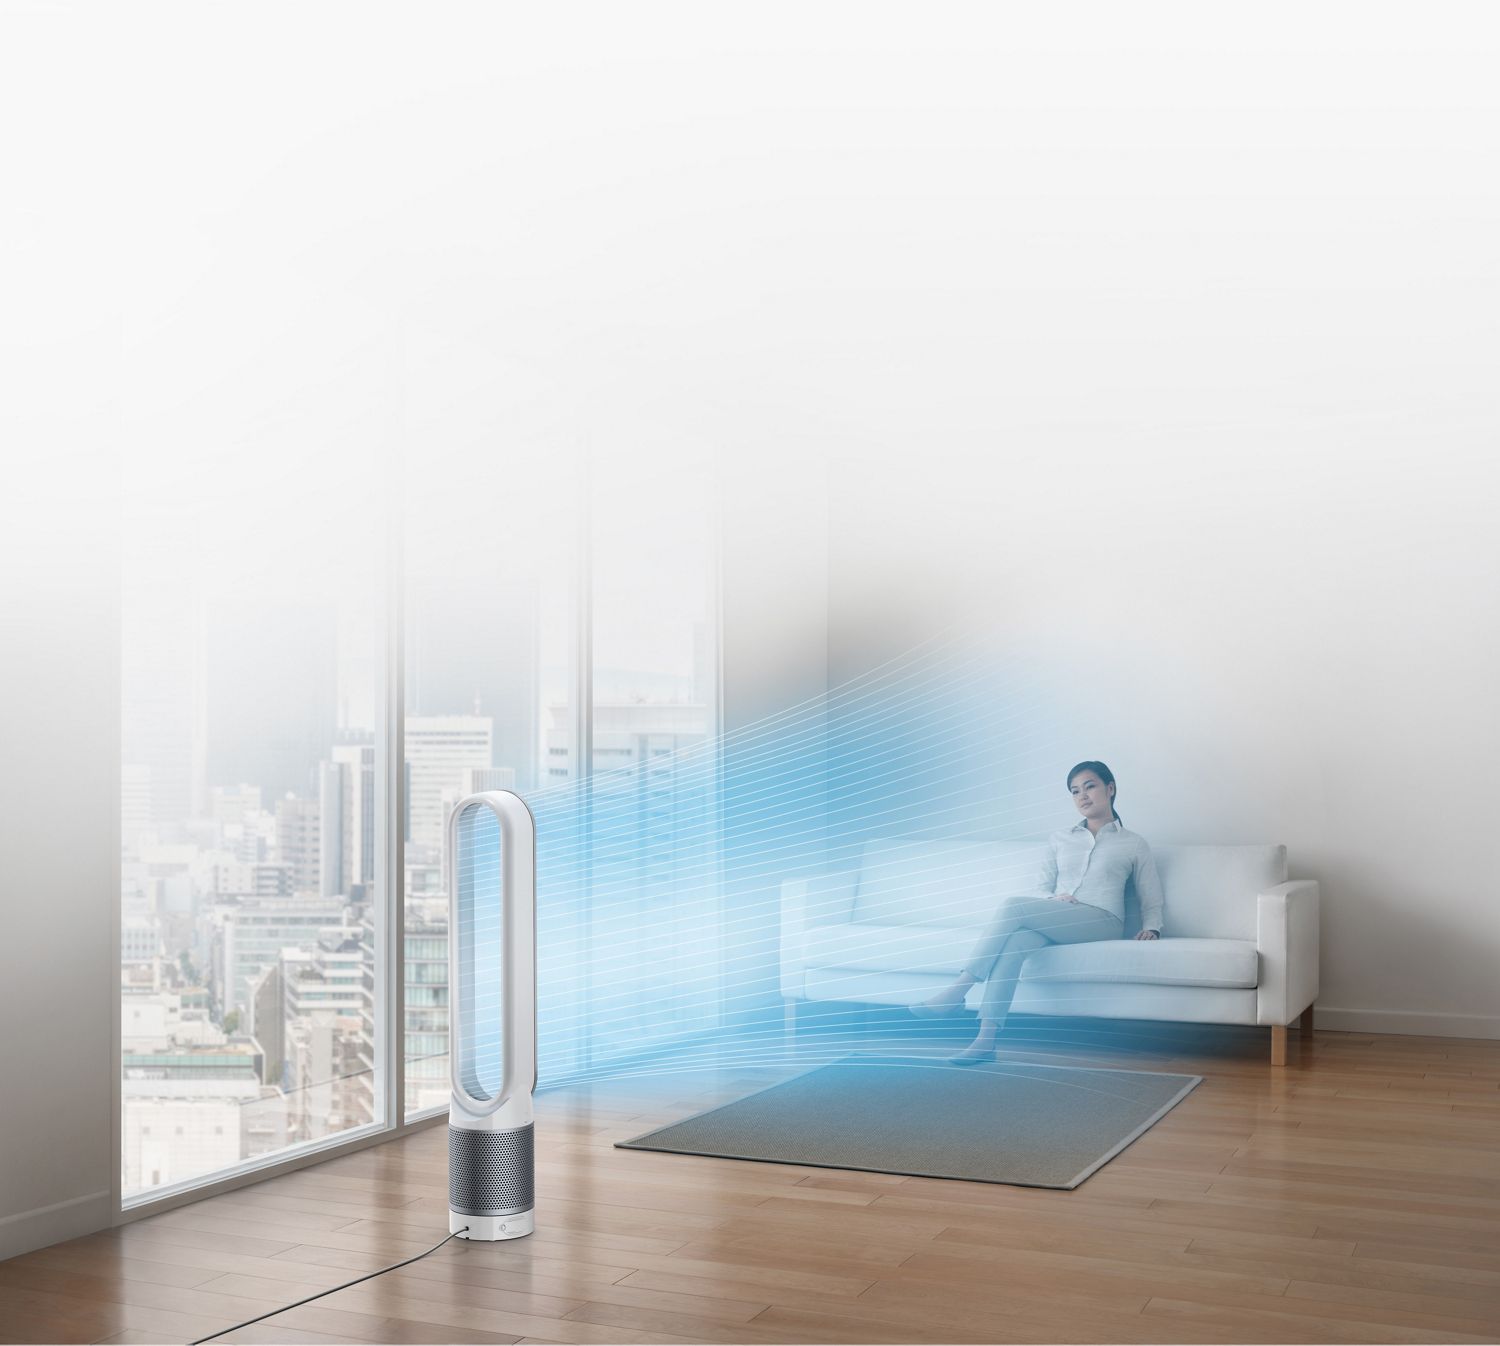 Dyson Pure Cool Link™ purifiers